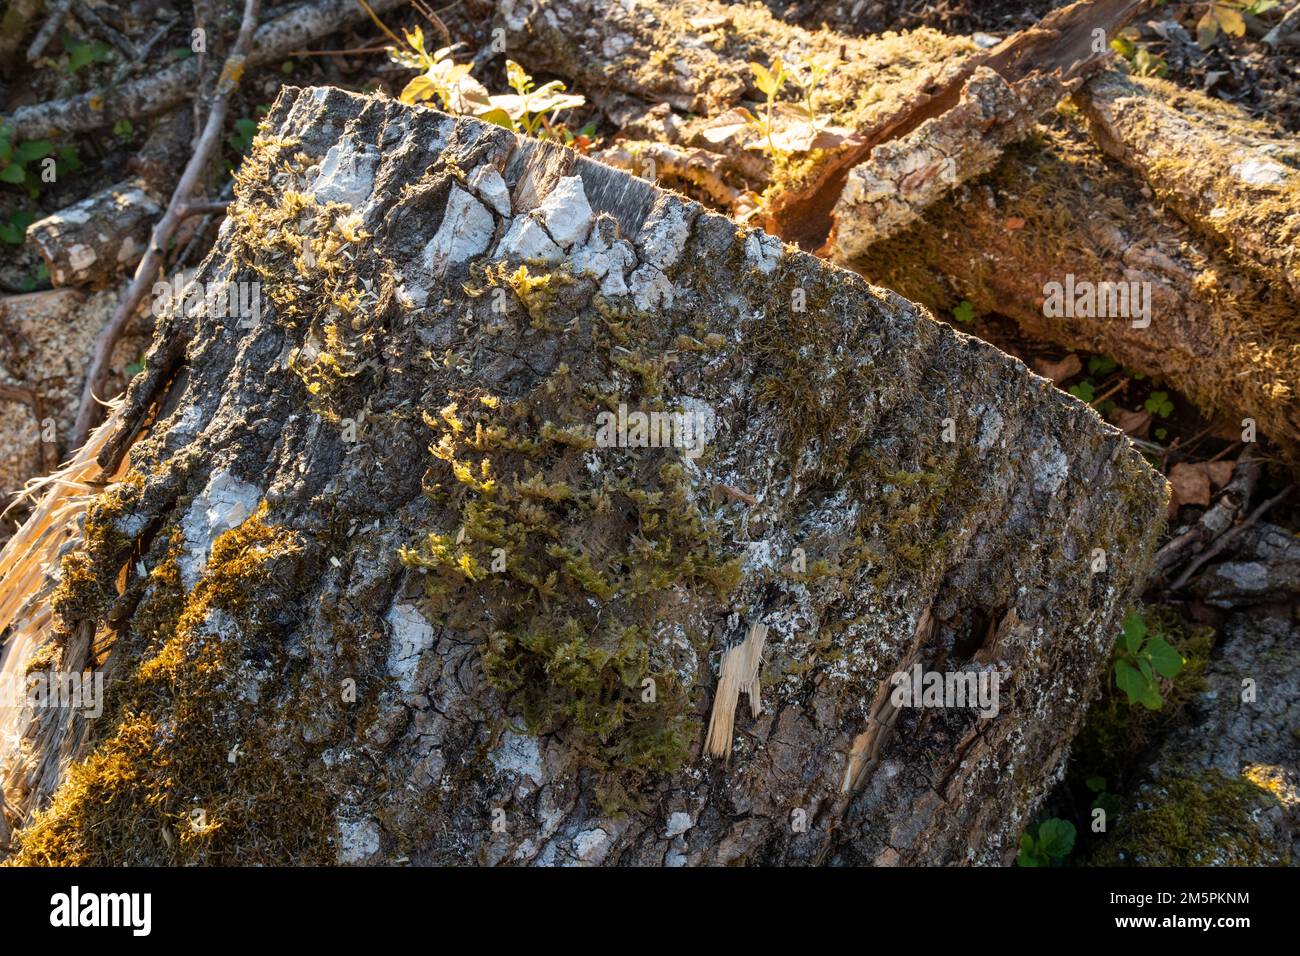 Keystone species Shingle moss on the edge of a freshly cut tree on a clear-cut area in Estonia, Northern Europe Stock Photo